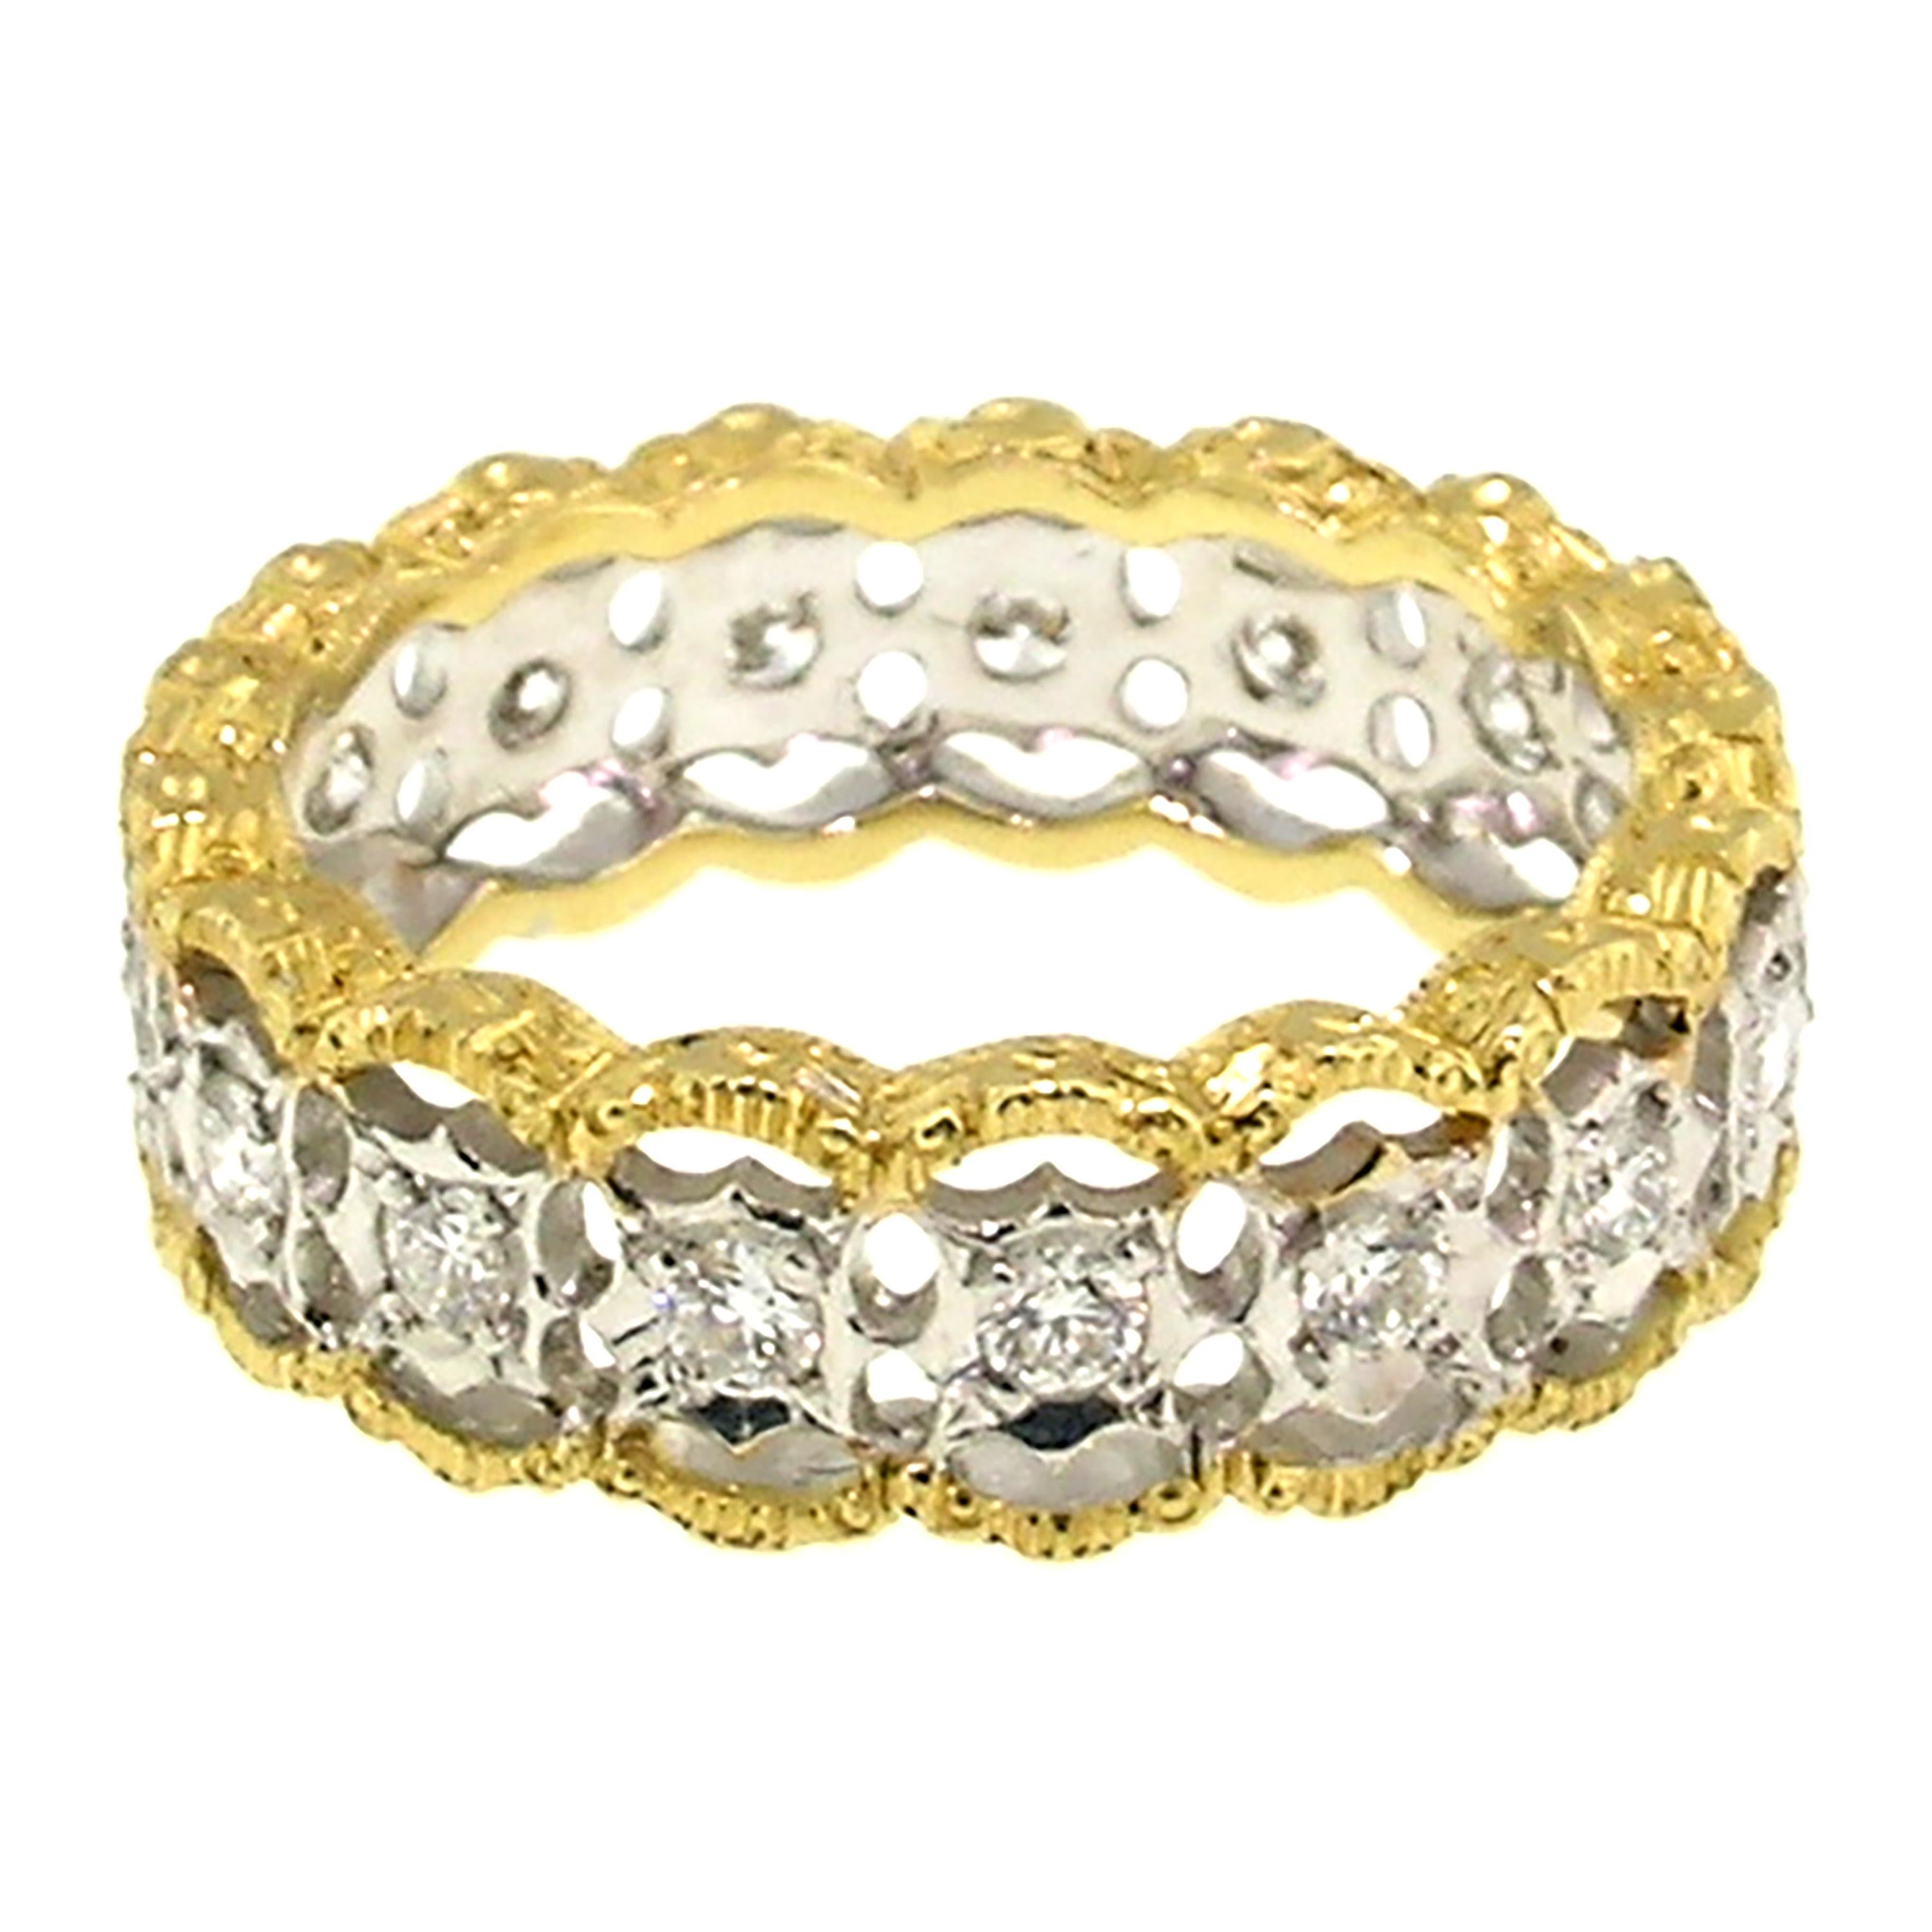 18kt and 0.90ct Diamond Custom Eternity Band Handmade in Florence, Italy 4